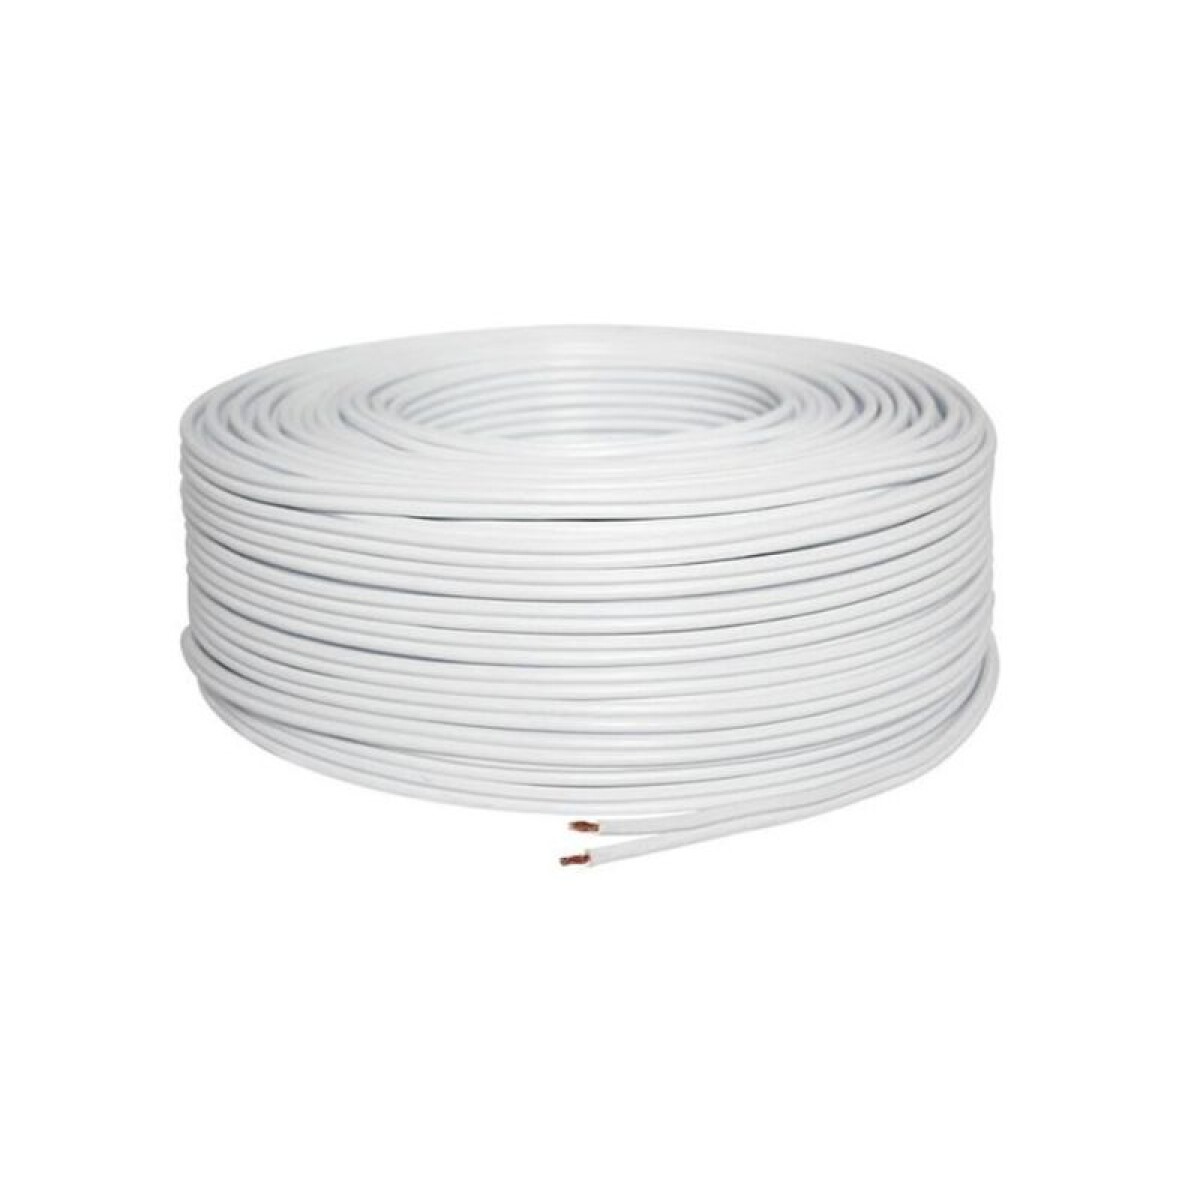 CABLE GEMELO 2 X 2 - 1 MT 